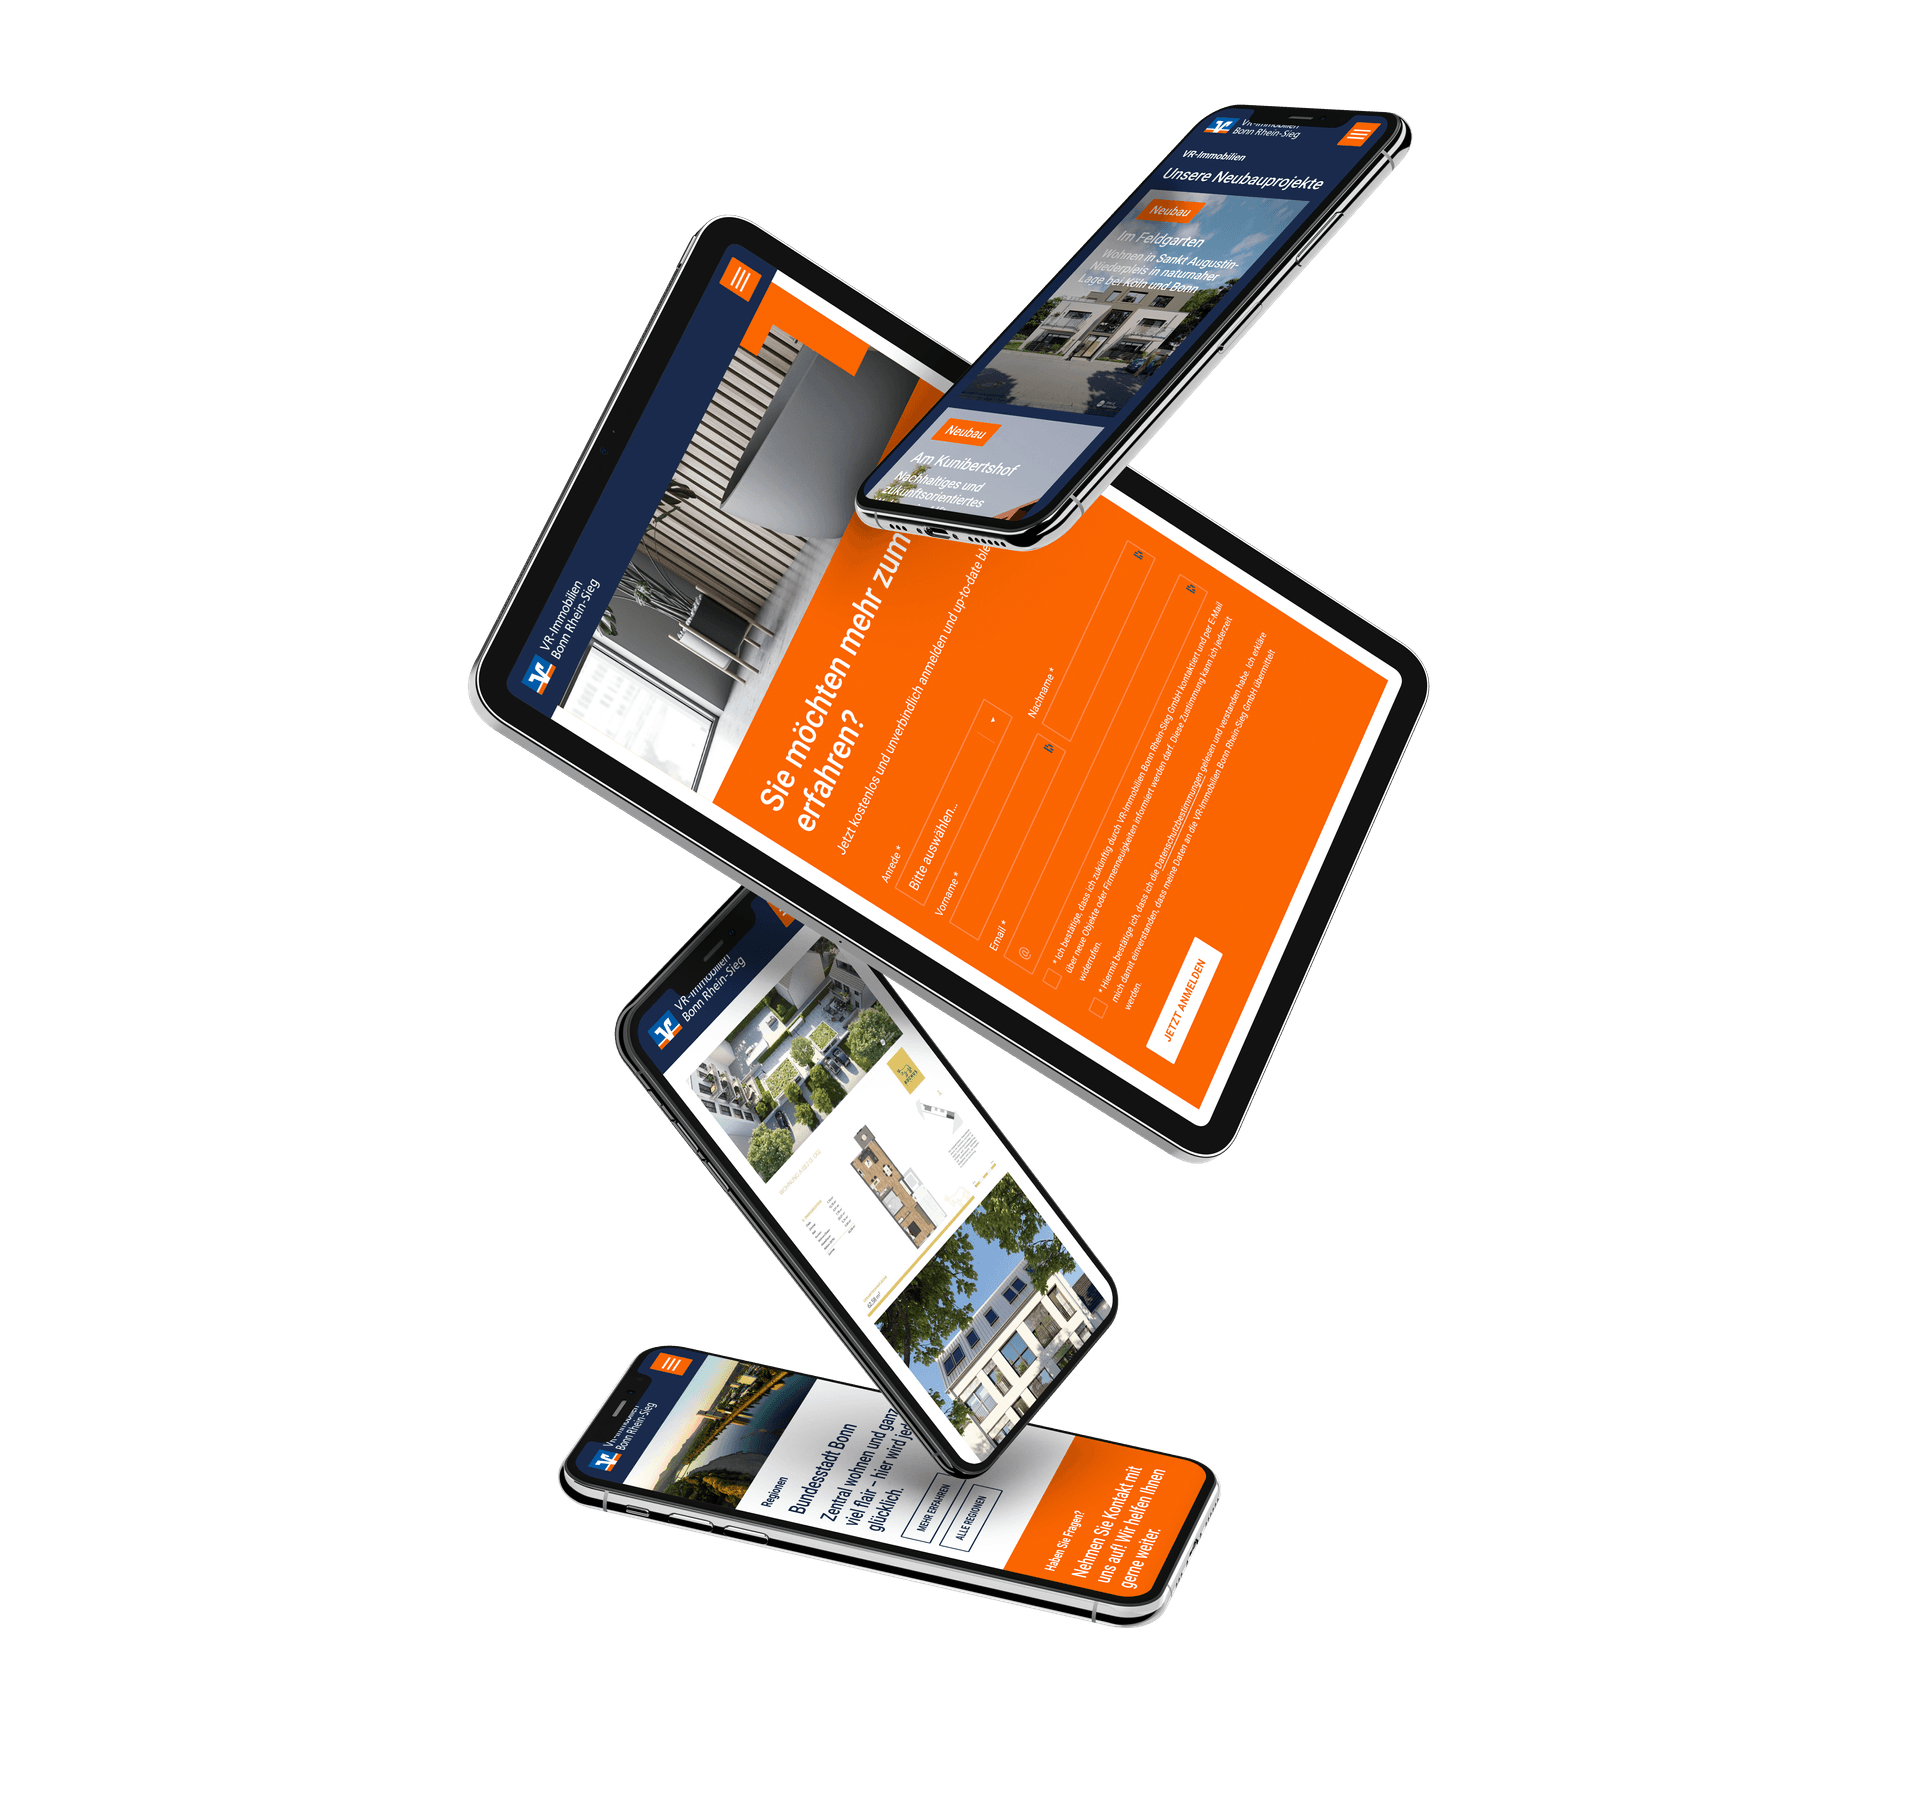 KP_Referenz_VR-Immobilien_Web_Devices.png
				